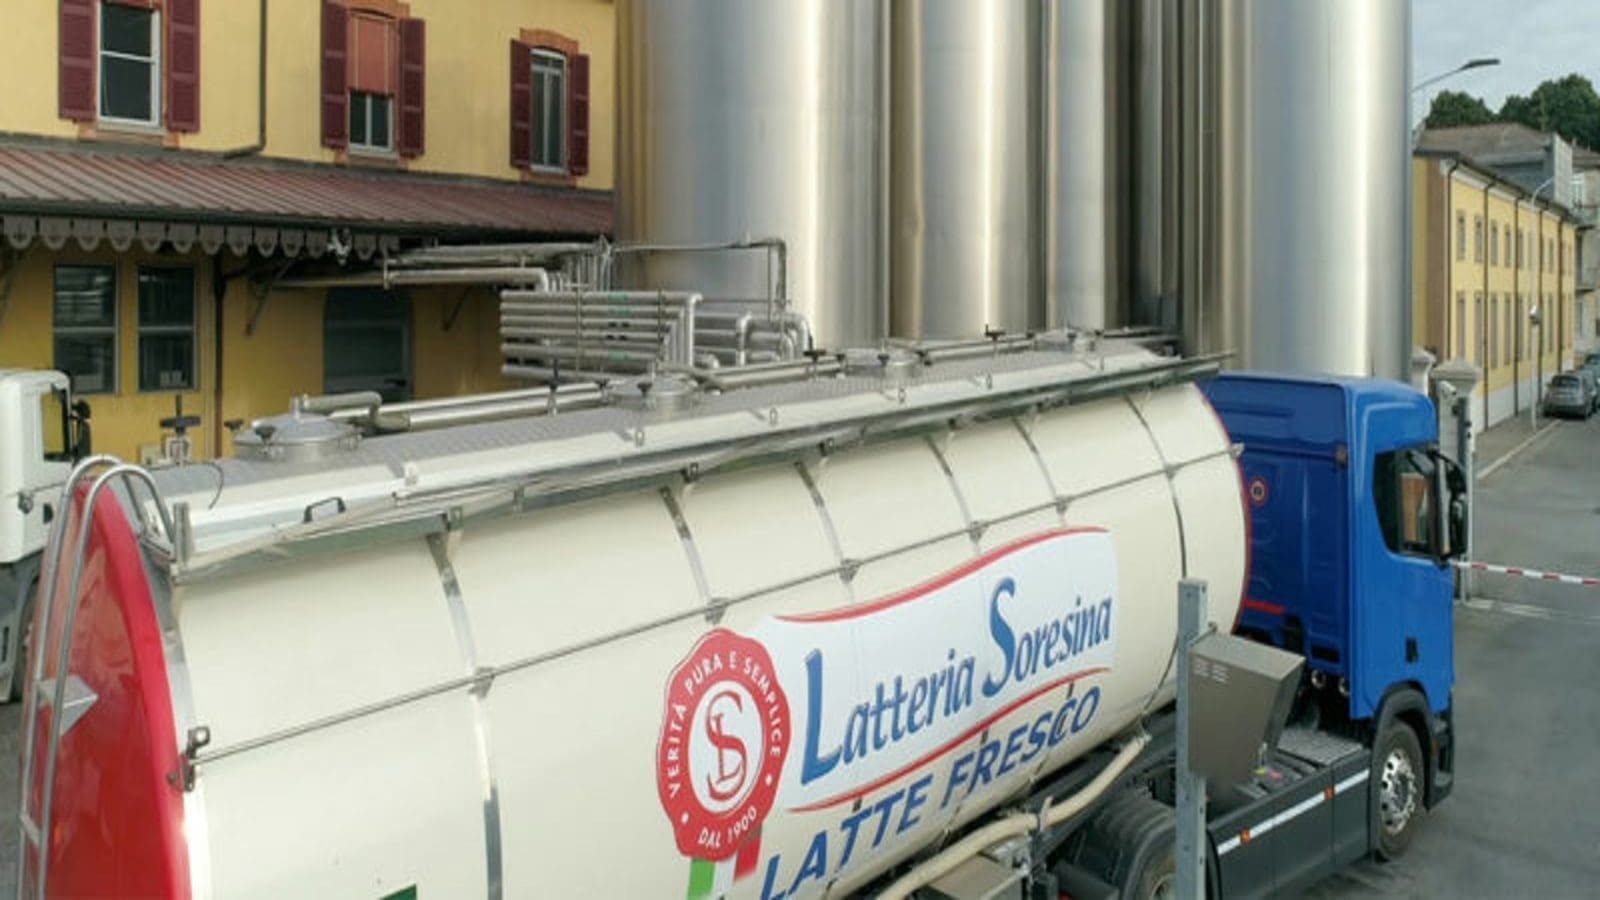 Latteria Soresina to acquire Italian cheese maker Oioli dairy in growth strategy